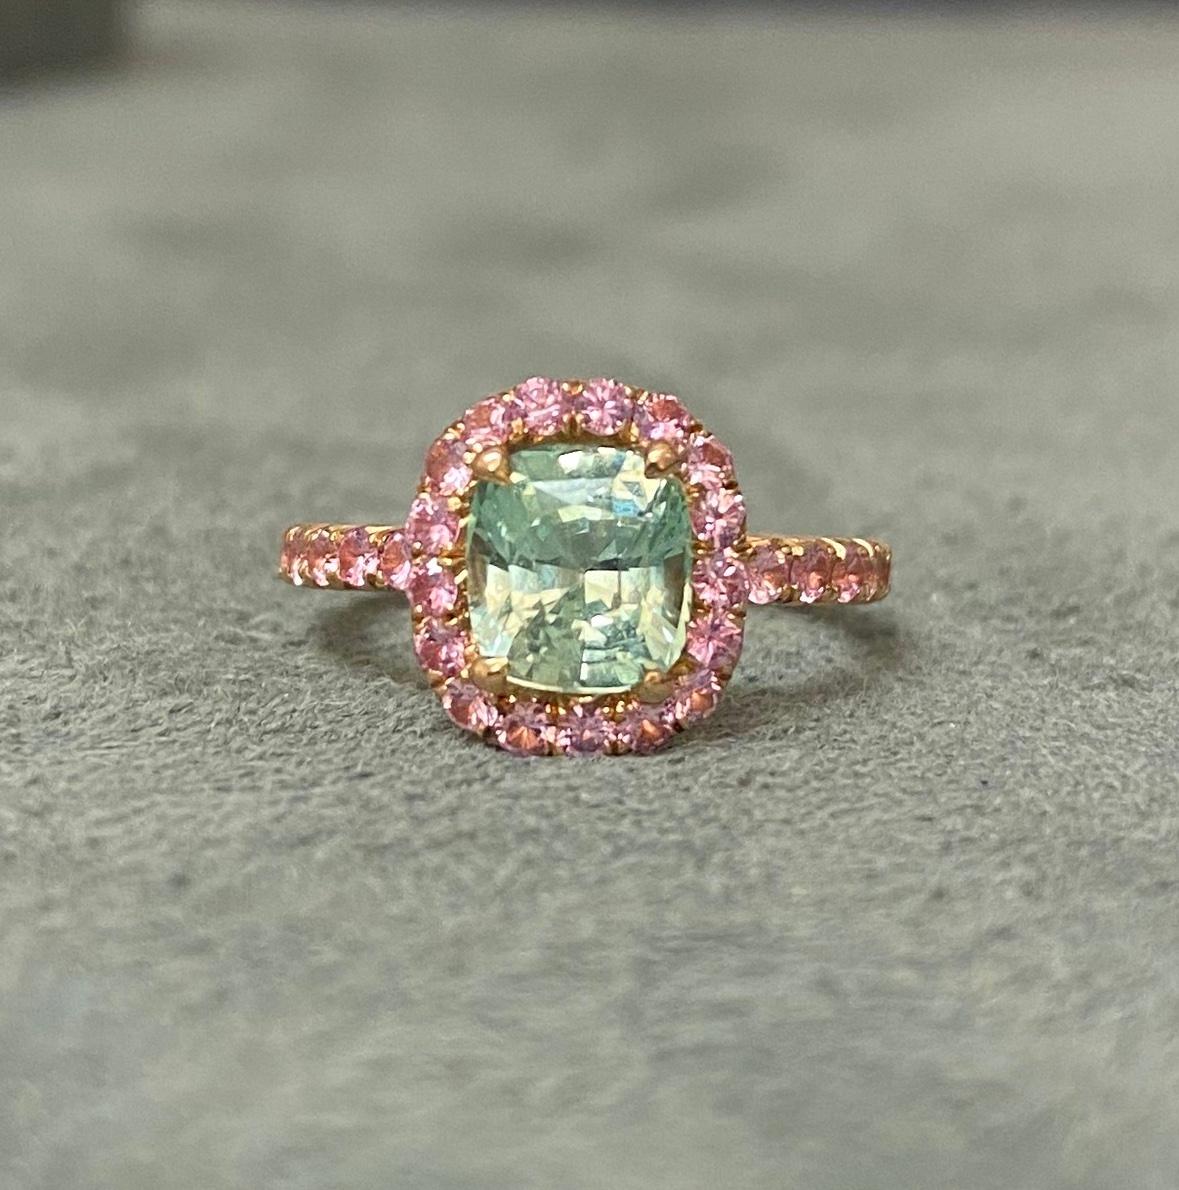 A beautiful chrysoberyl with an unusual pastel green colour set with light pink sapphires in 18k rose gold. The pink sapphires are set approximately 2/3 of the way around the band. The ring is hand-made in Geneva, and is a perfect fit for the little